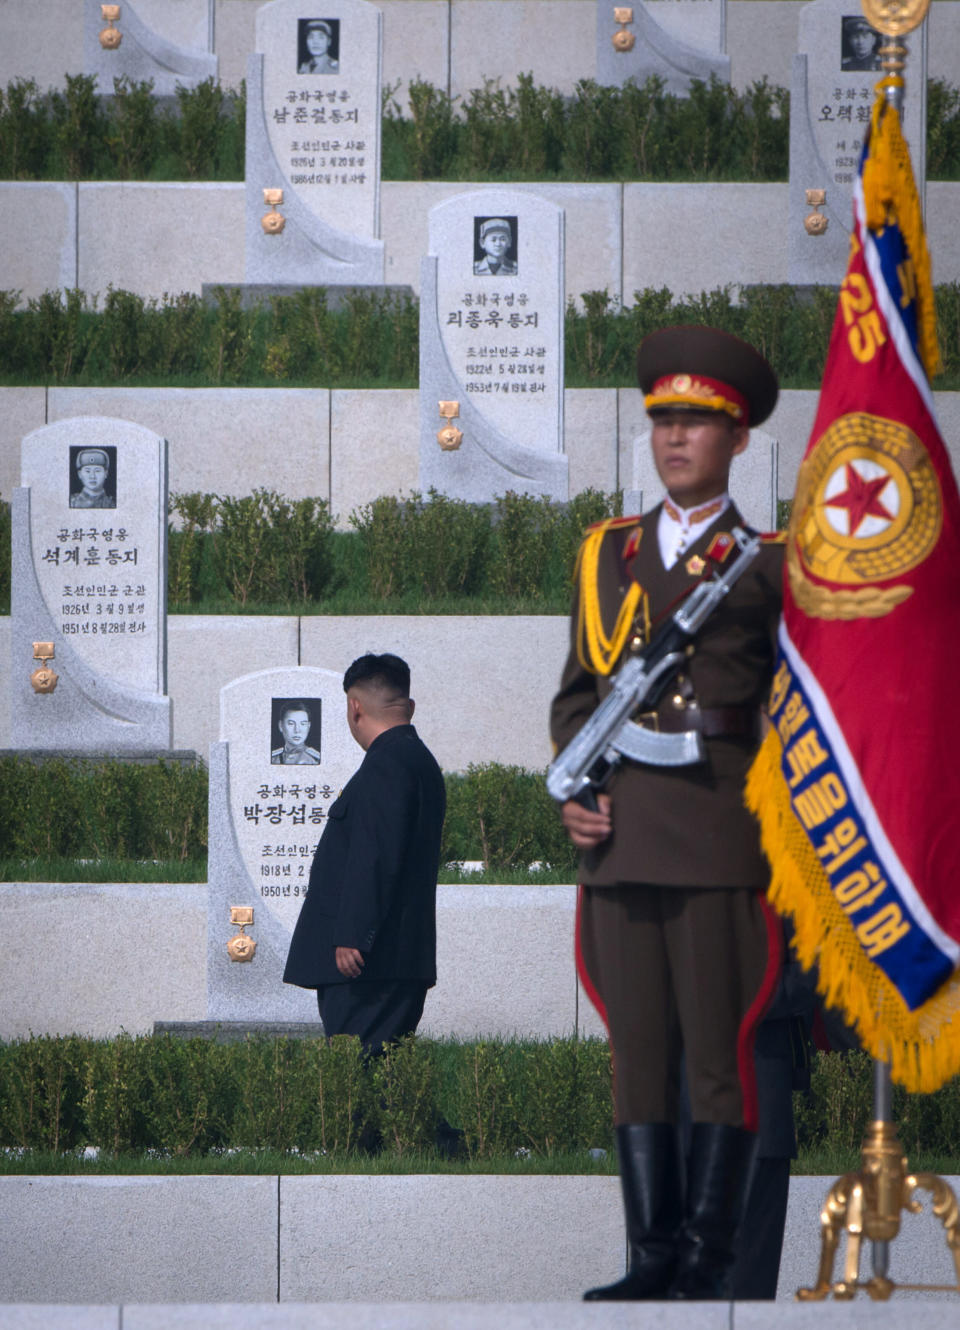 North Korean leader Kim Jong-Un (L) looks at tombstones during the inauguration of a Korean war military cemetery in Pyongyang on July 25, 2013. (Ed Jones/AFP/Getty Images)